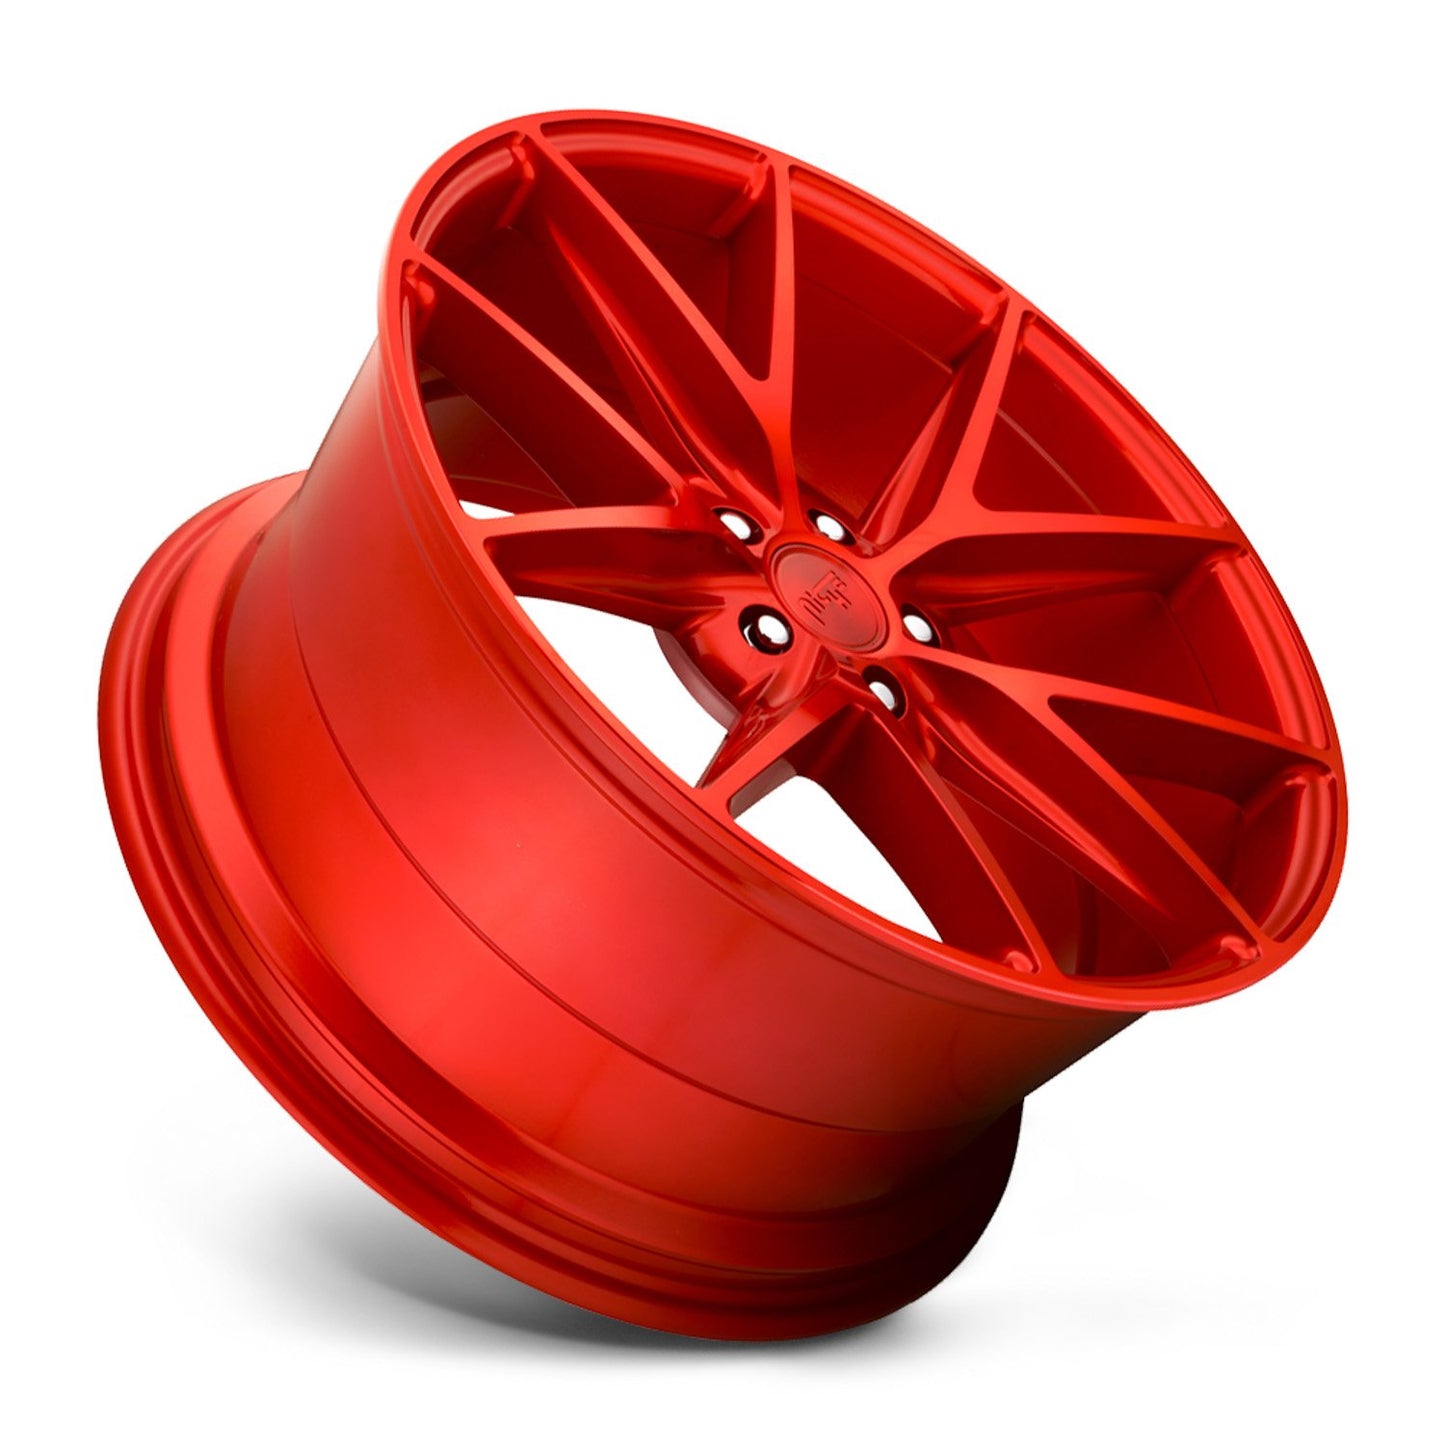 NICHE ROAD WHEELS - M186 Misano Candy Red